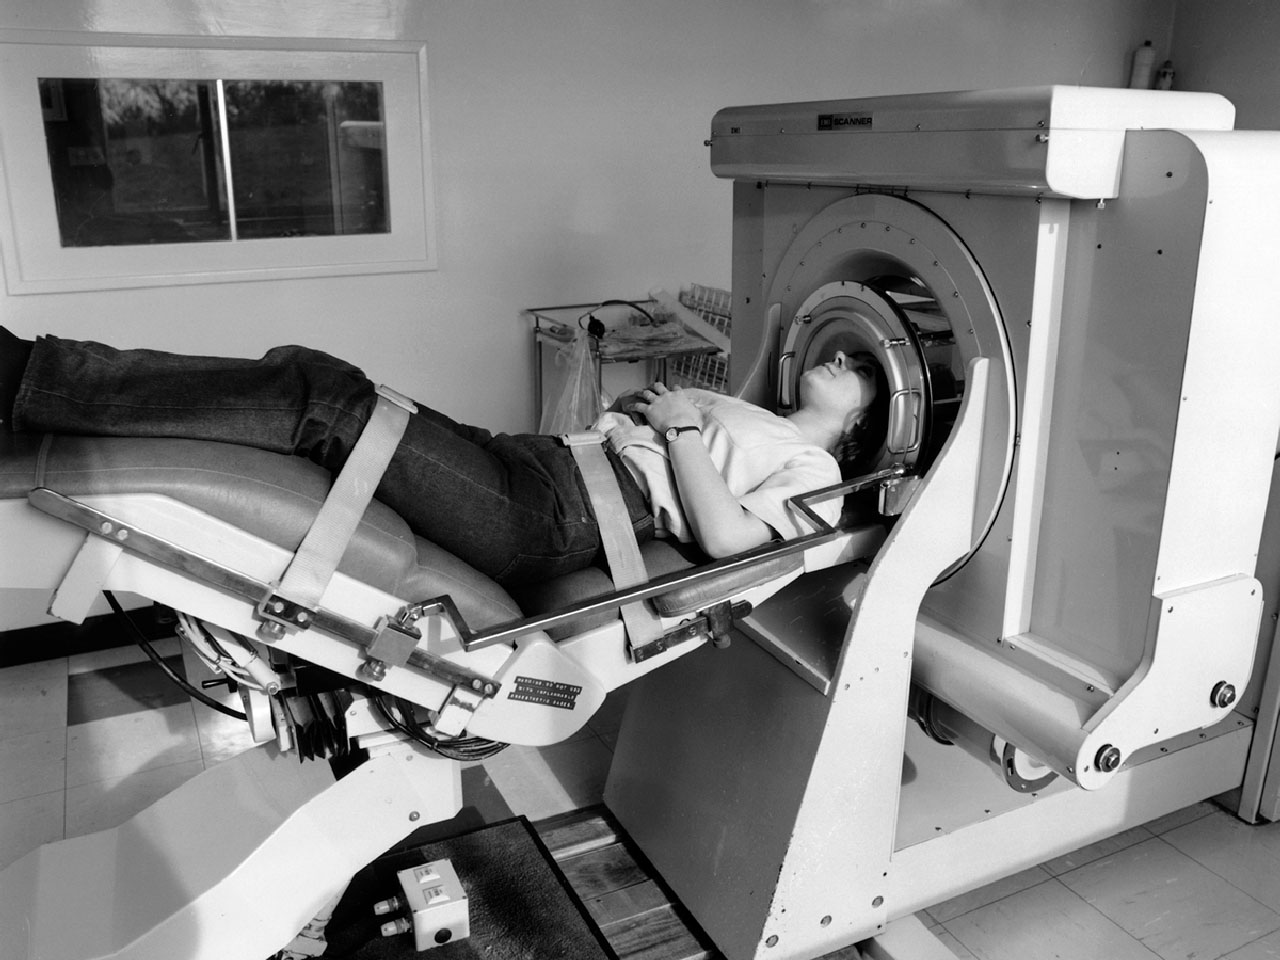 A person lying in a medical machine

Description automatically generated